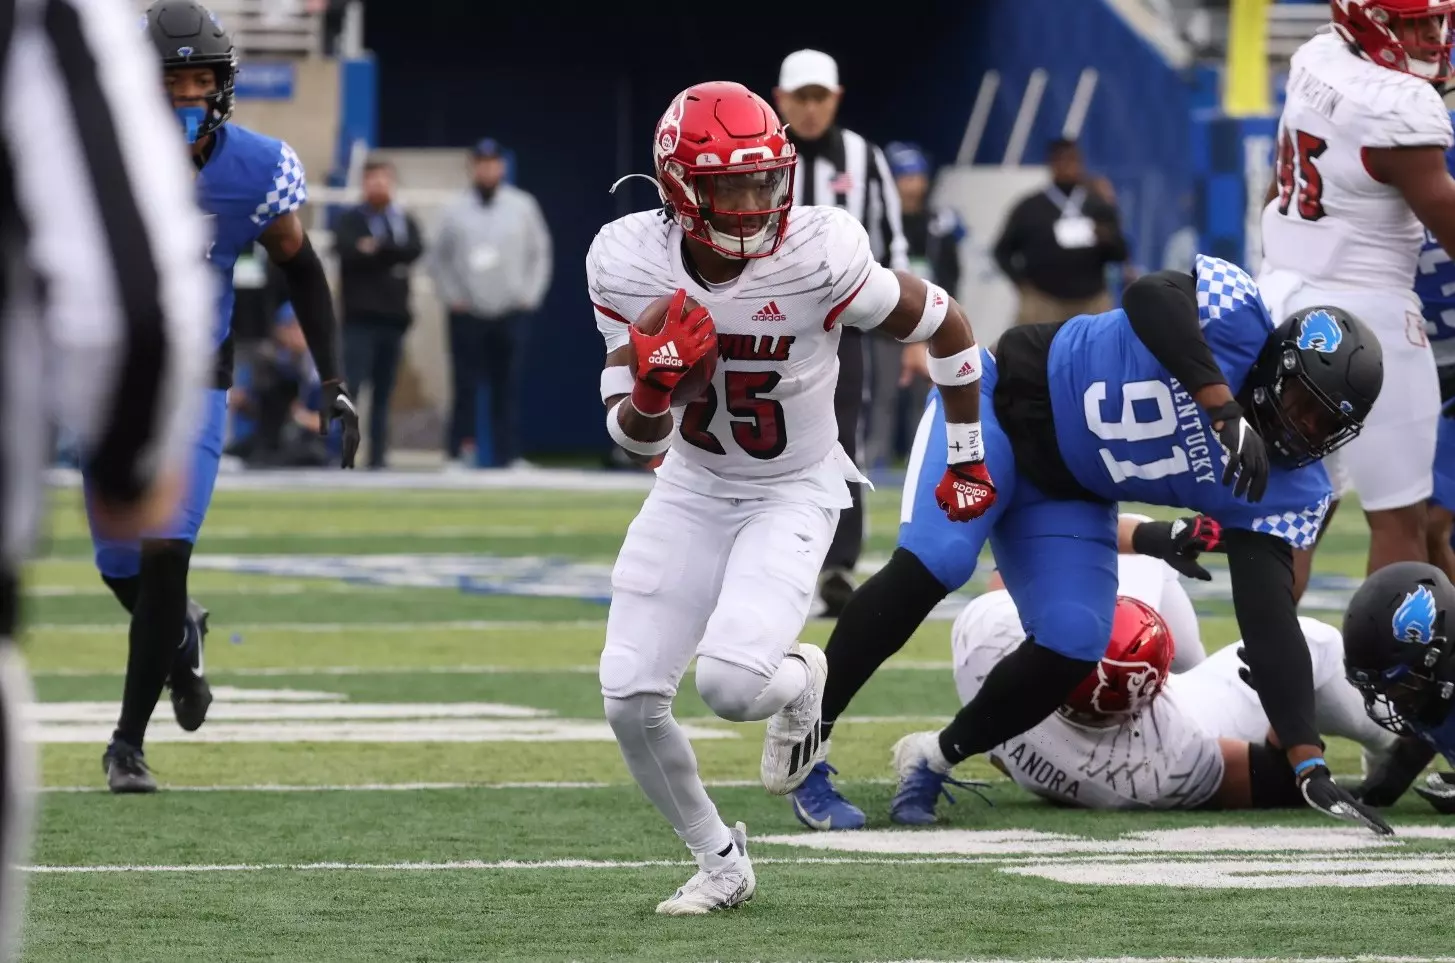 Jawhar Jordan is a versatile playmaker for Louisville who's able to squirt through holes as a runner as well as be a quality receiver and return specialist. Hula Bowl scout Justyce Gordon breaks down Jordan as an NFL Prospect in his report.